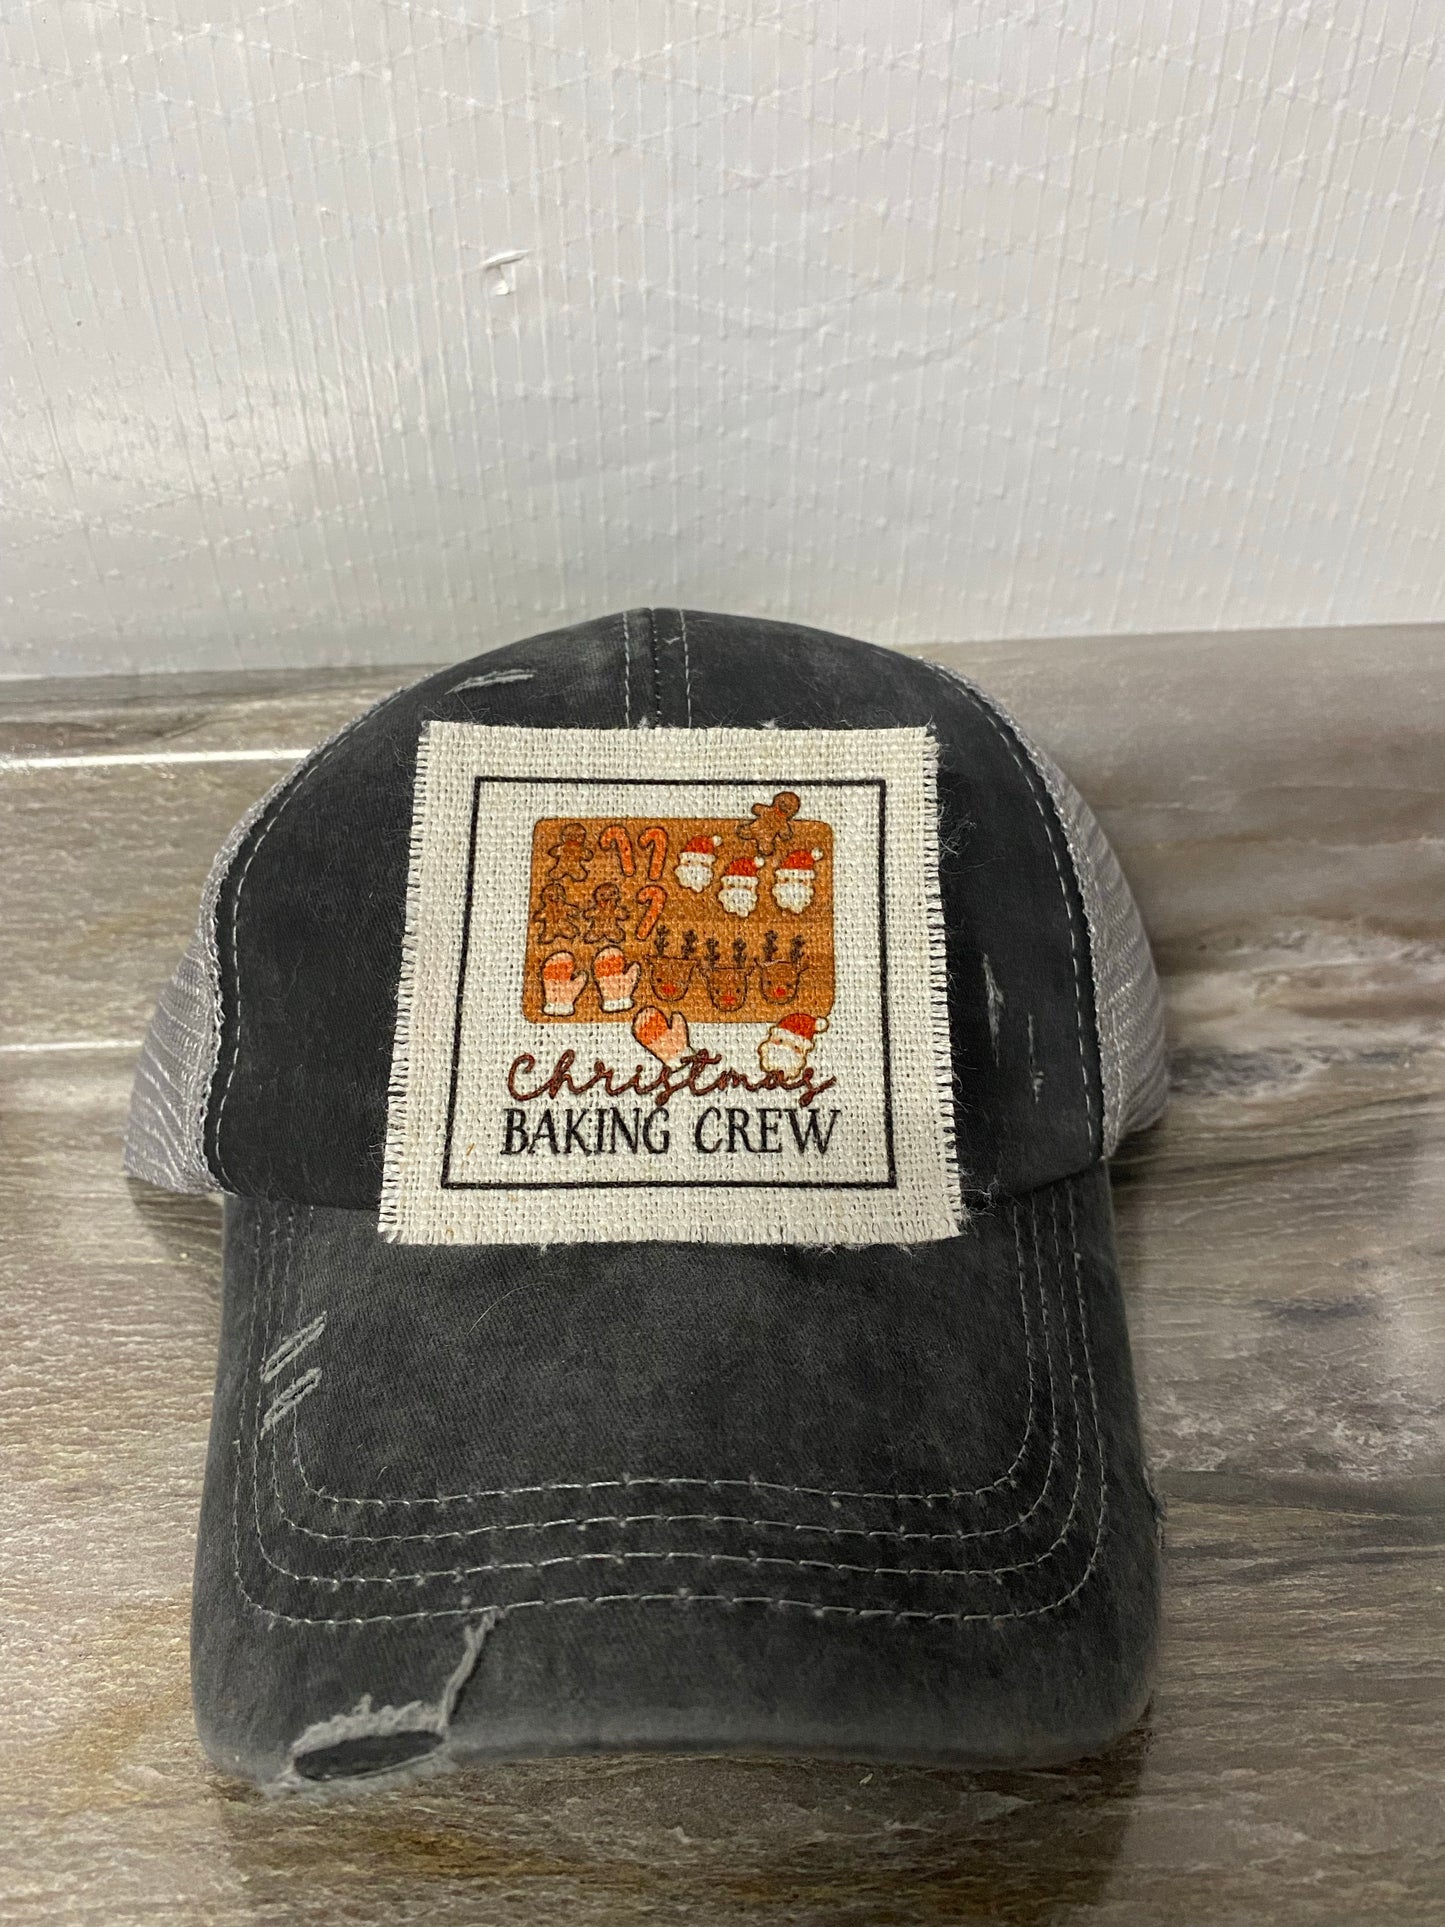 Christmas Baking Crew Hat Patch